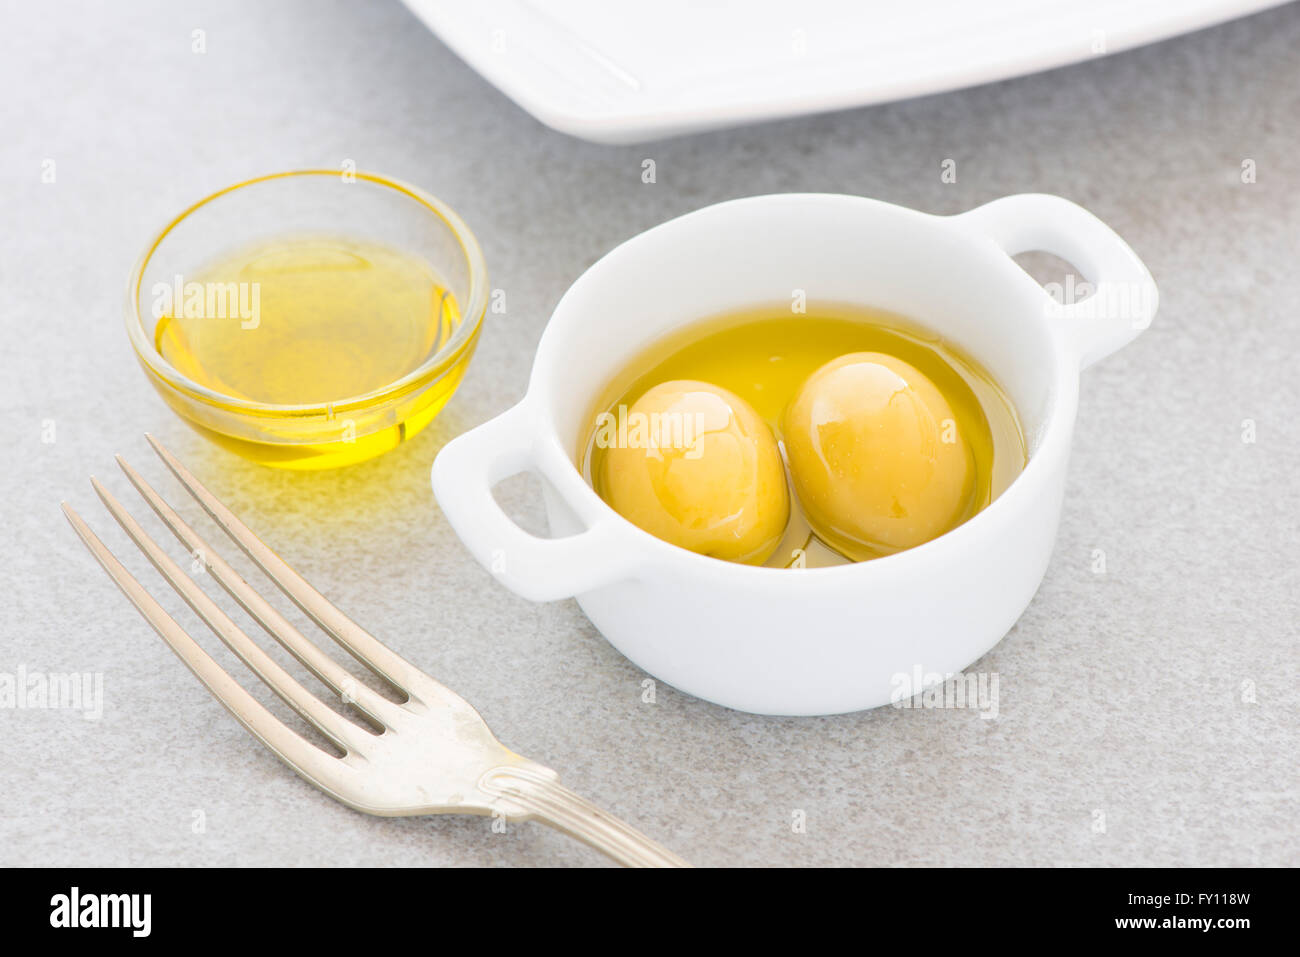 Green olives and olive oil. Still life photo of appetizer or snack. Stock Photo